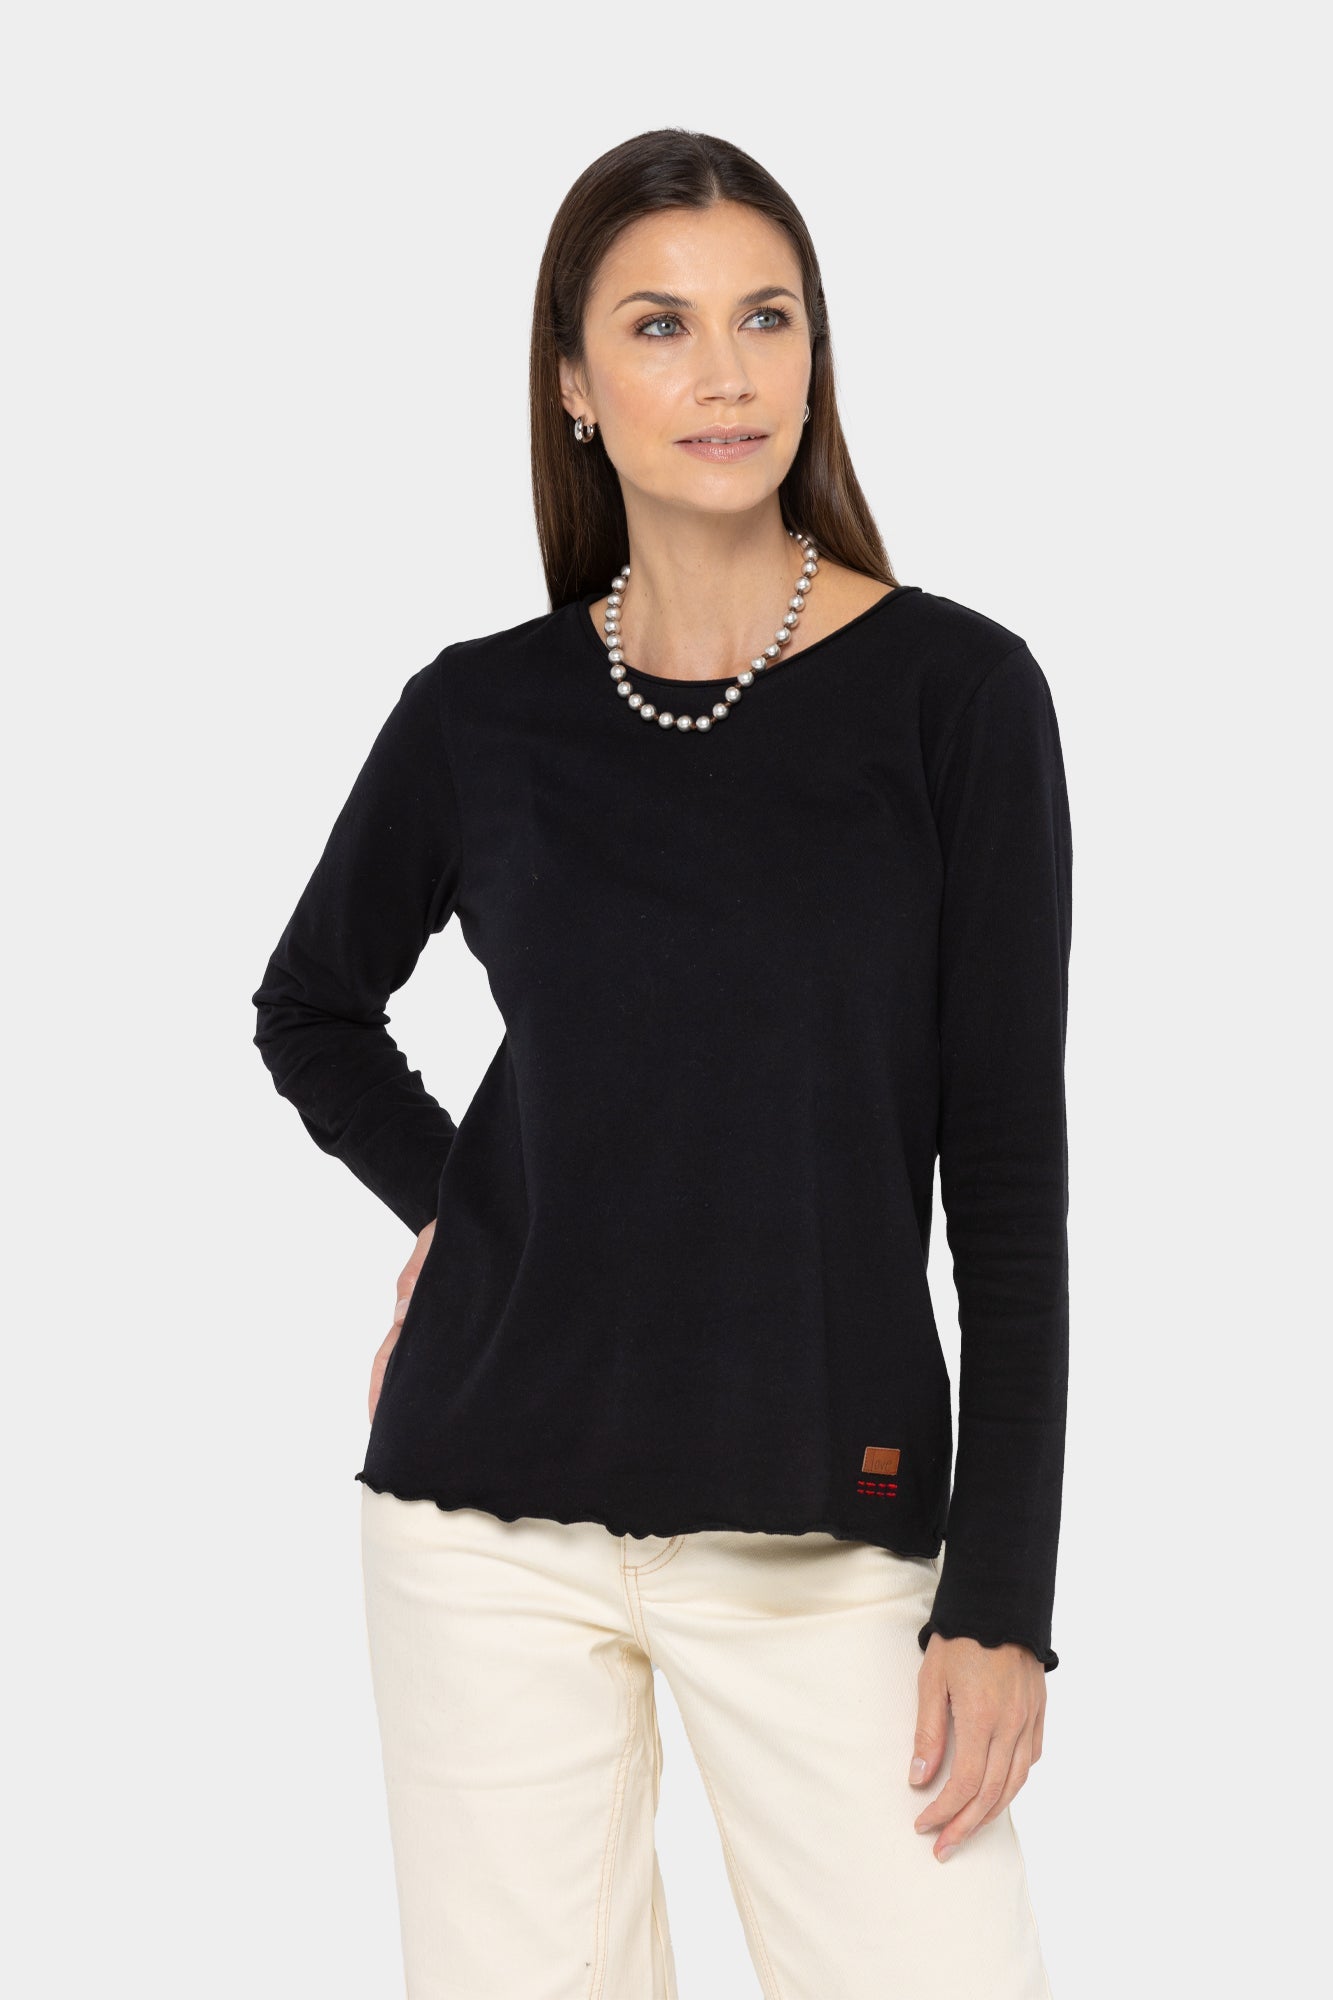 Sueded Knit Lettuce Edge Top